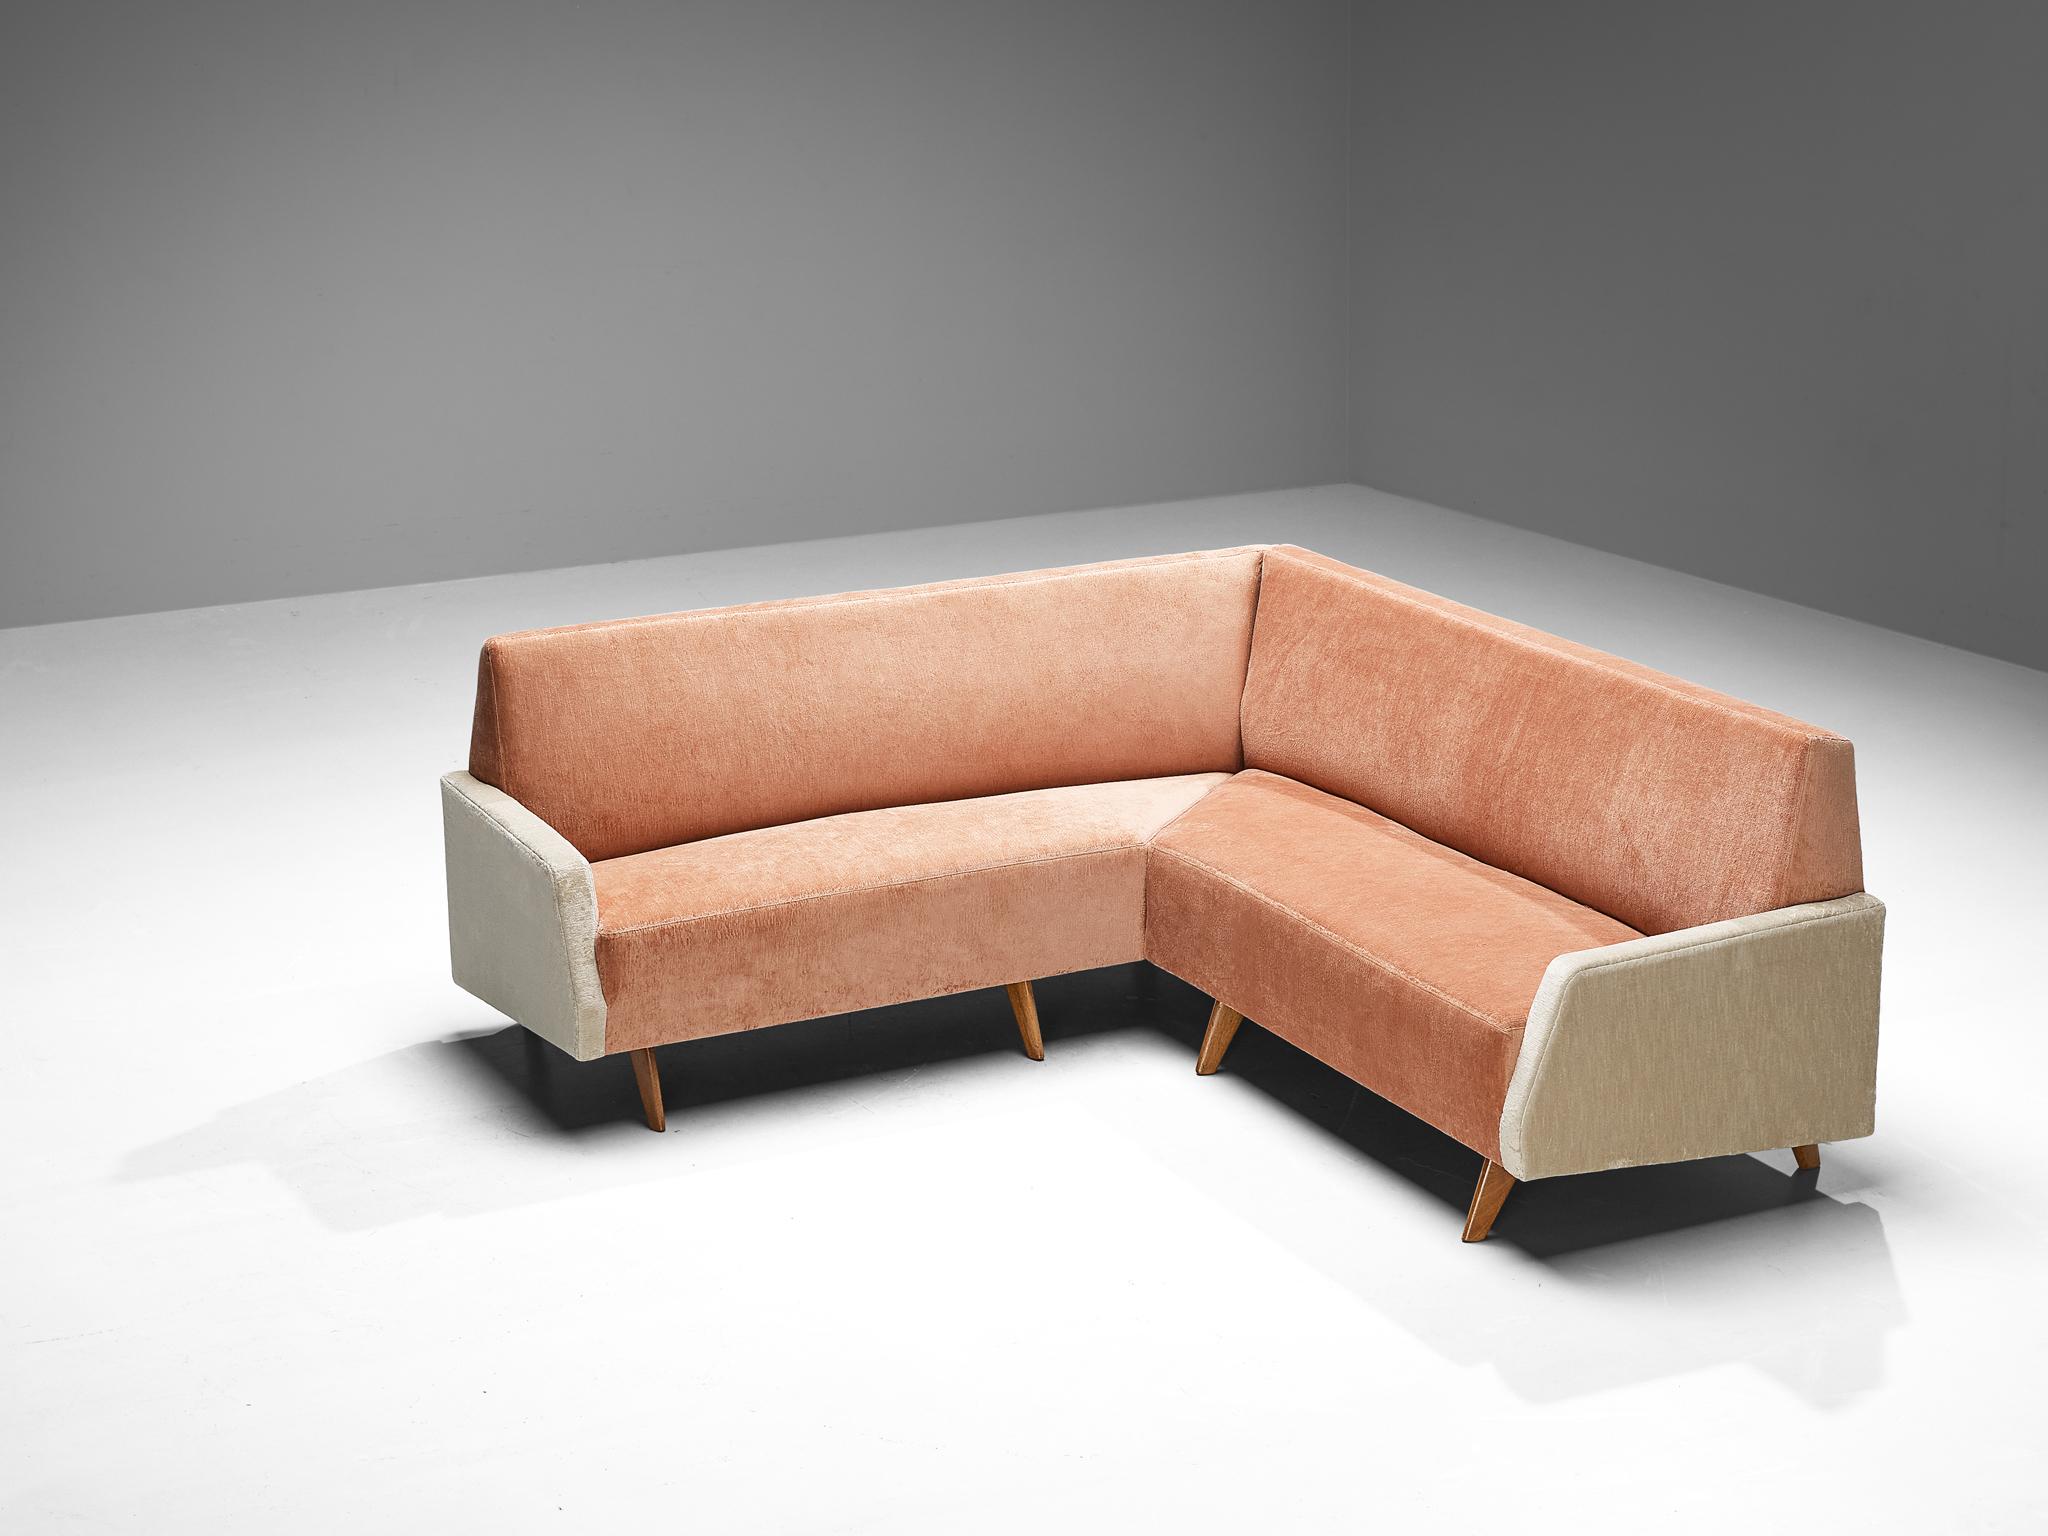 Gio Ponti sofa, Pierre Frey fabric and walnut, Italy, 1960s

Stunning sofa by Gio Ponti. This particular sofa breathes the luxurious feel of well-balanced Italian furniture designs of the 1960s. Made for a private residence in Italy, this piece was